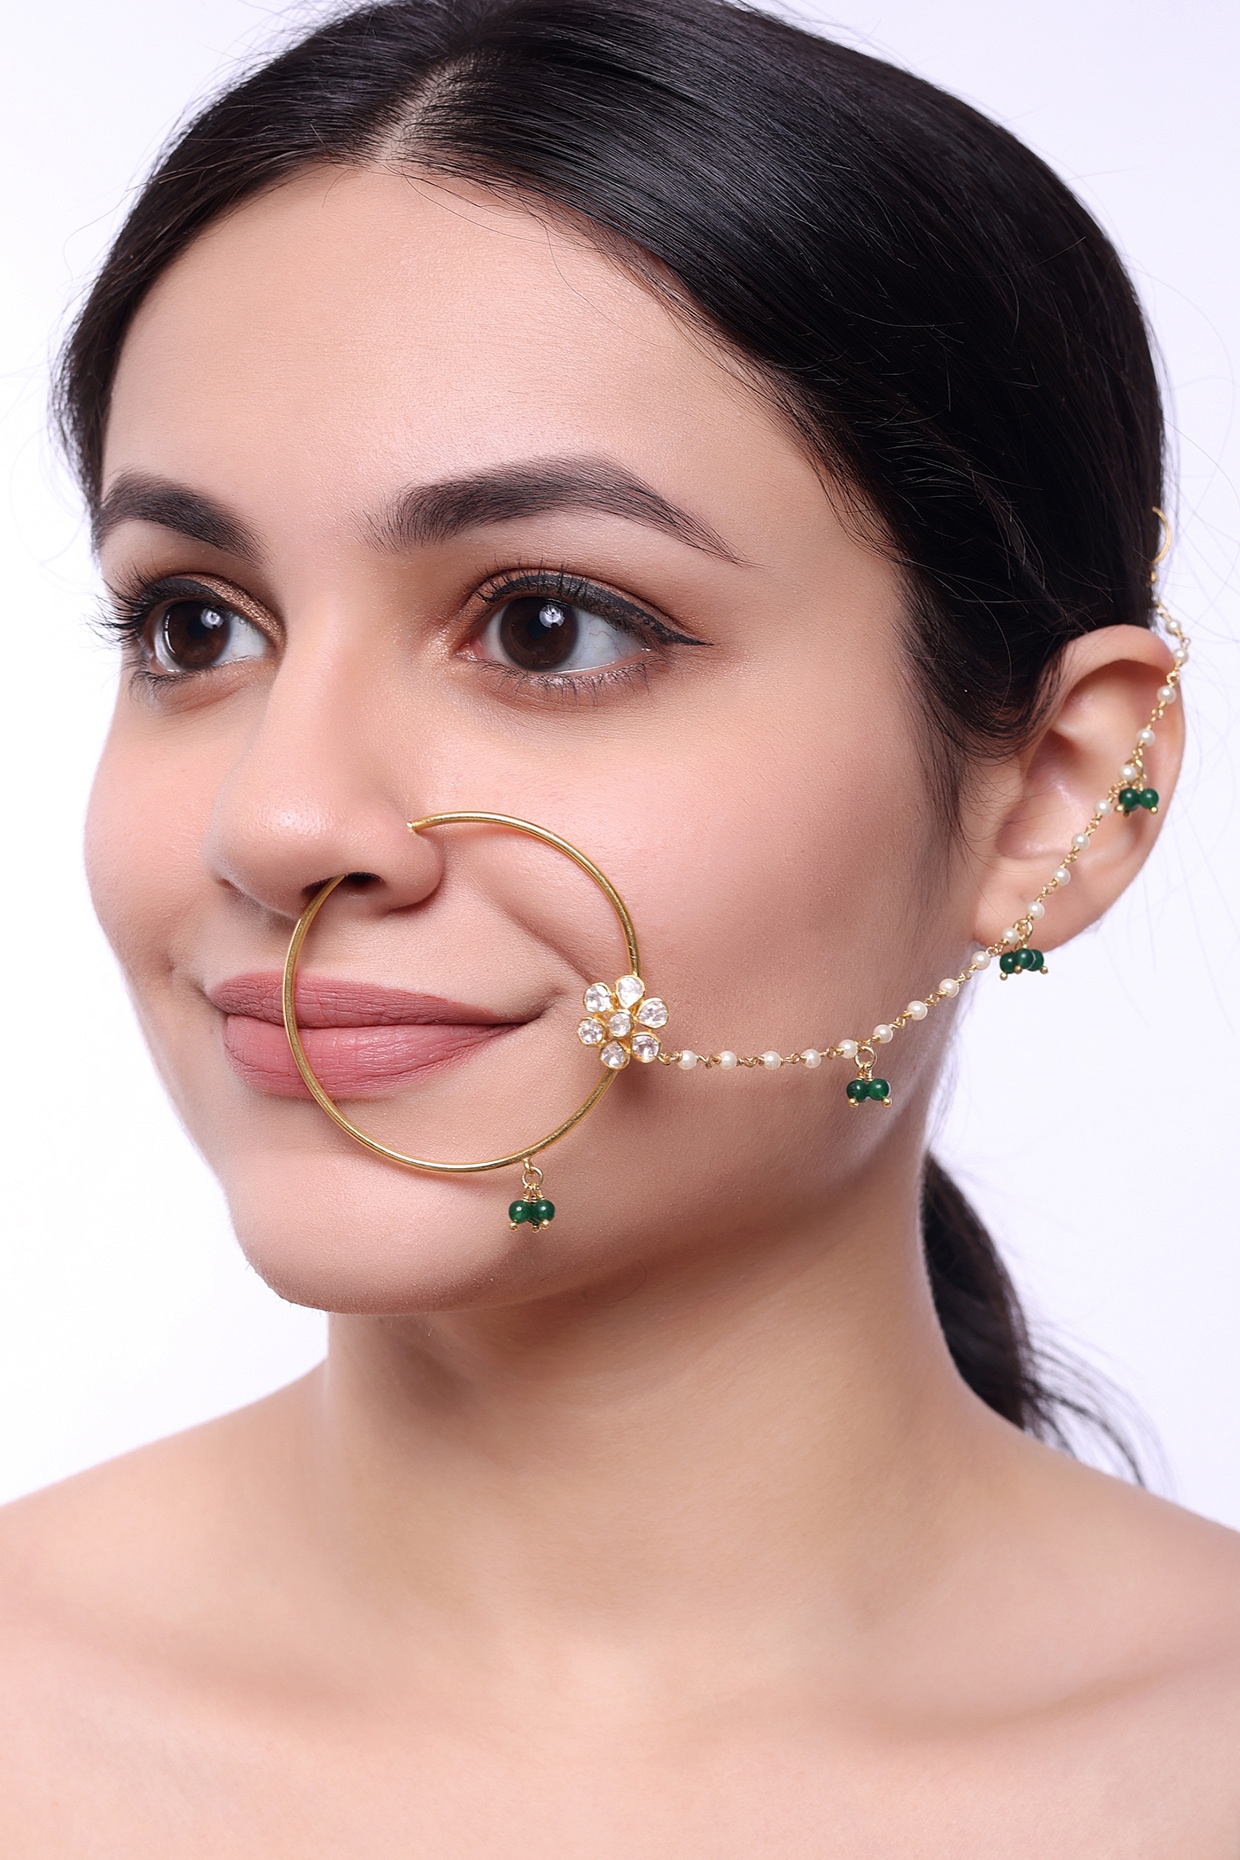 Delicate stylish flower style nath - Nose ring | Classy Missy by Gur